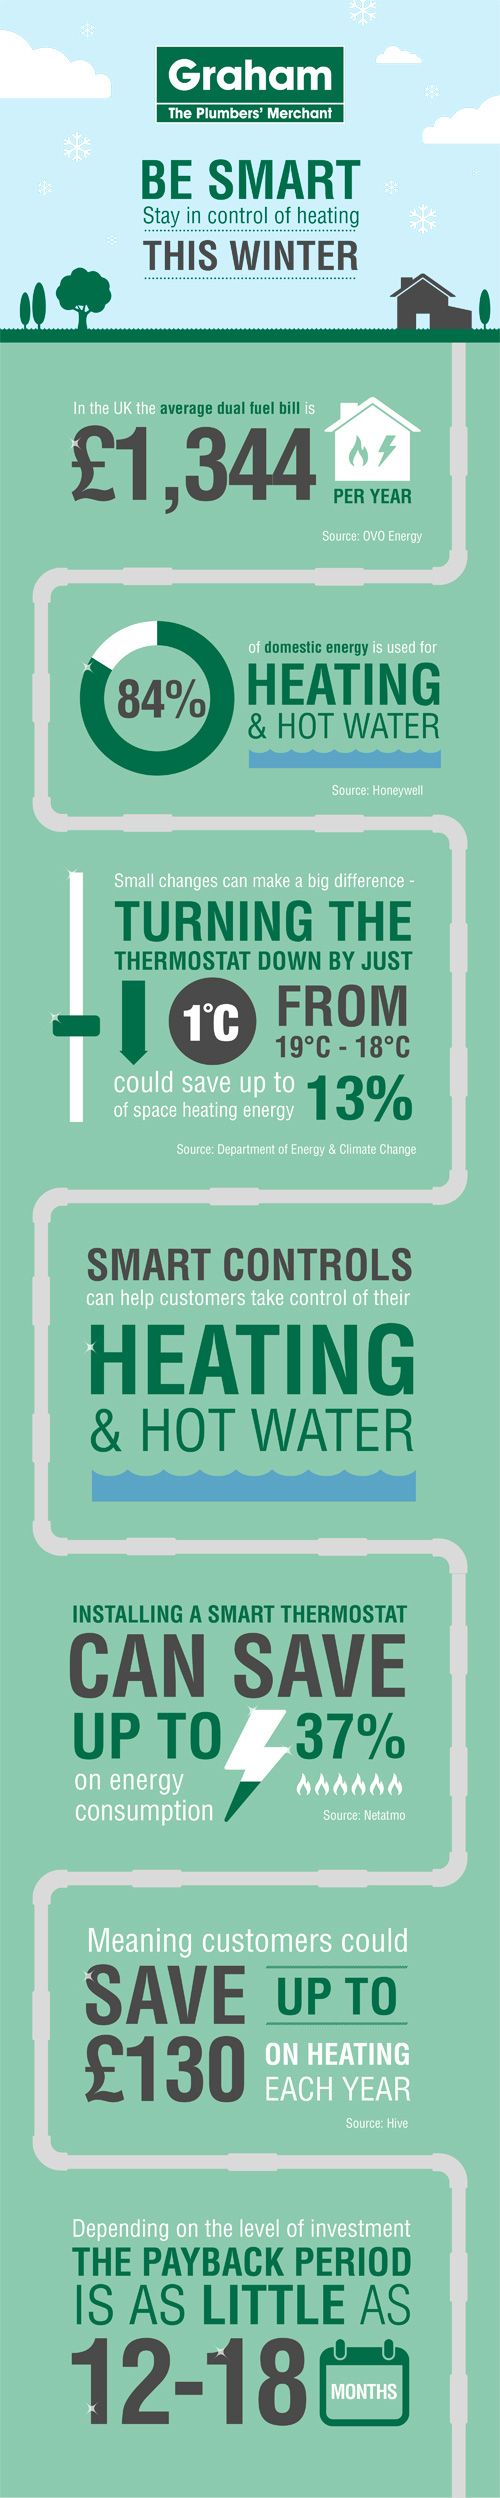 Graham’s infographic shows how energy savings can be made